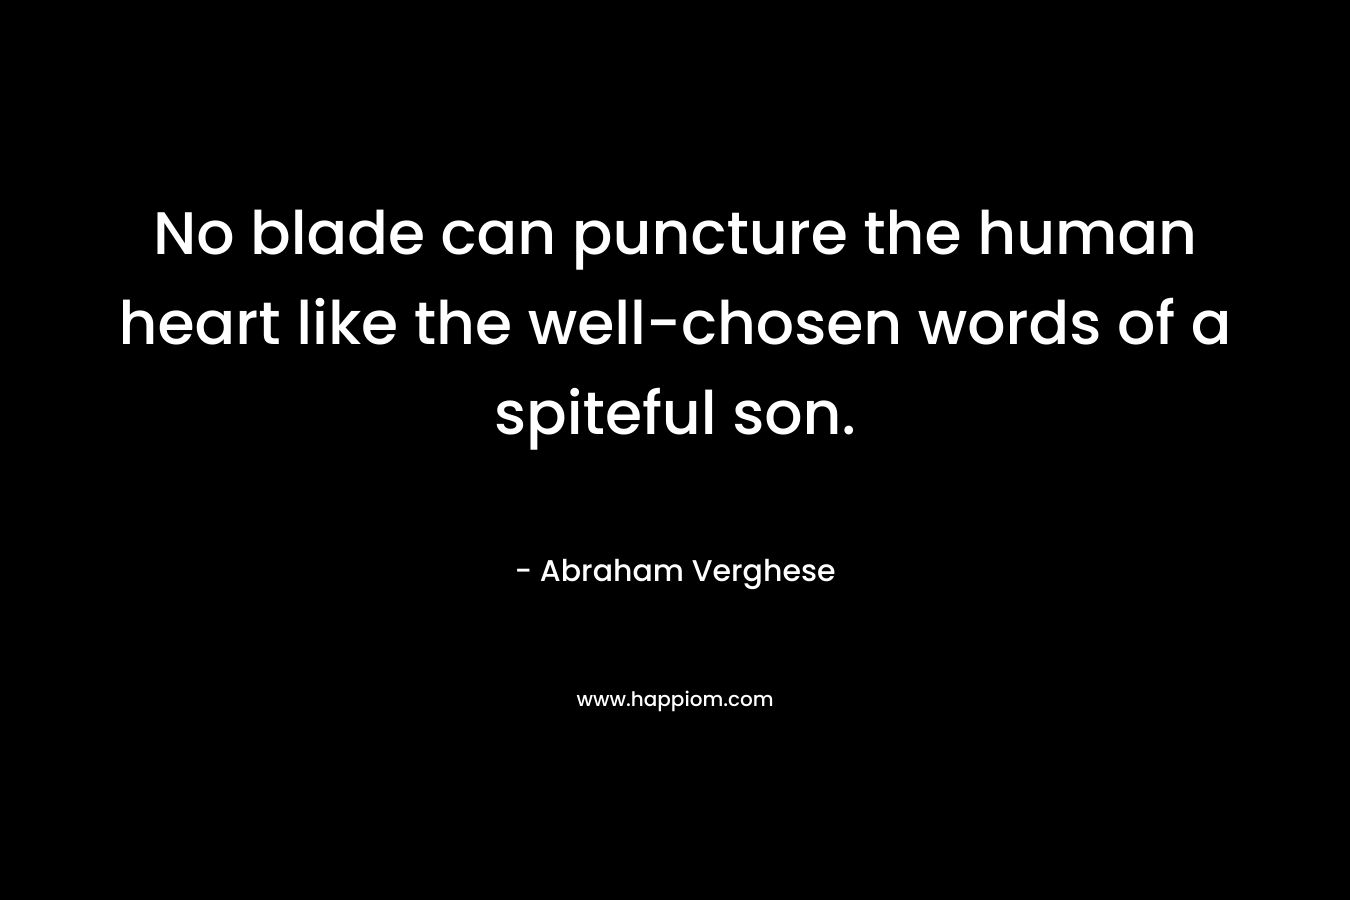 No blade can puncture the human heart like the well-chosen words of a spiteful son.